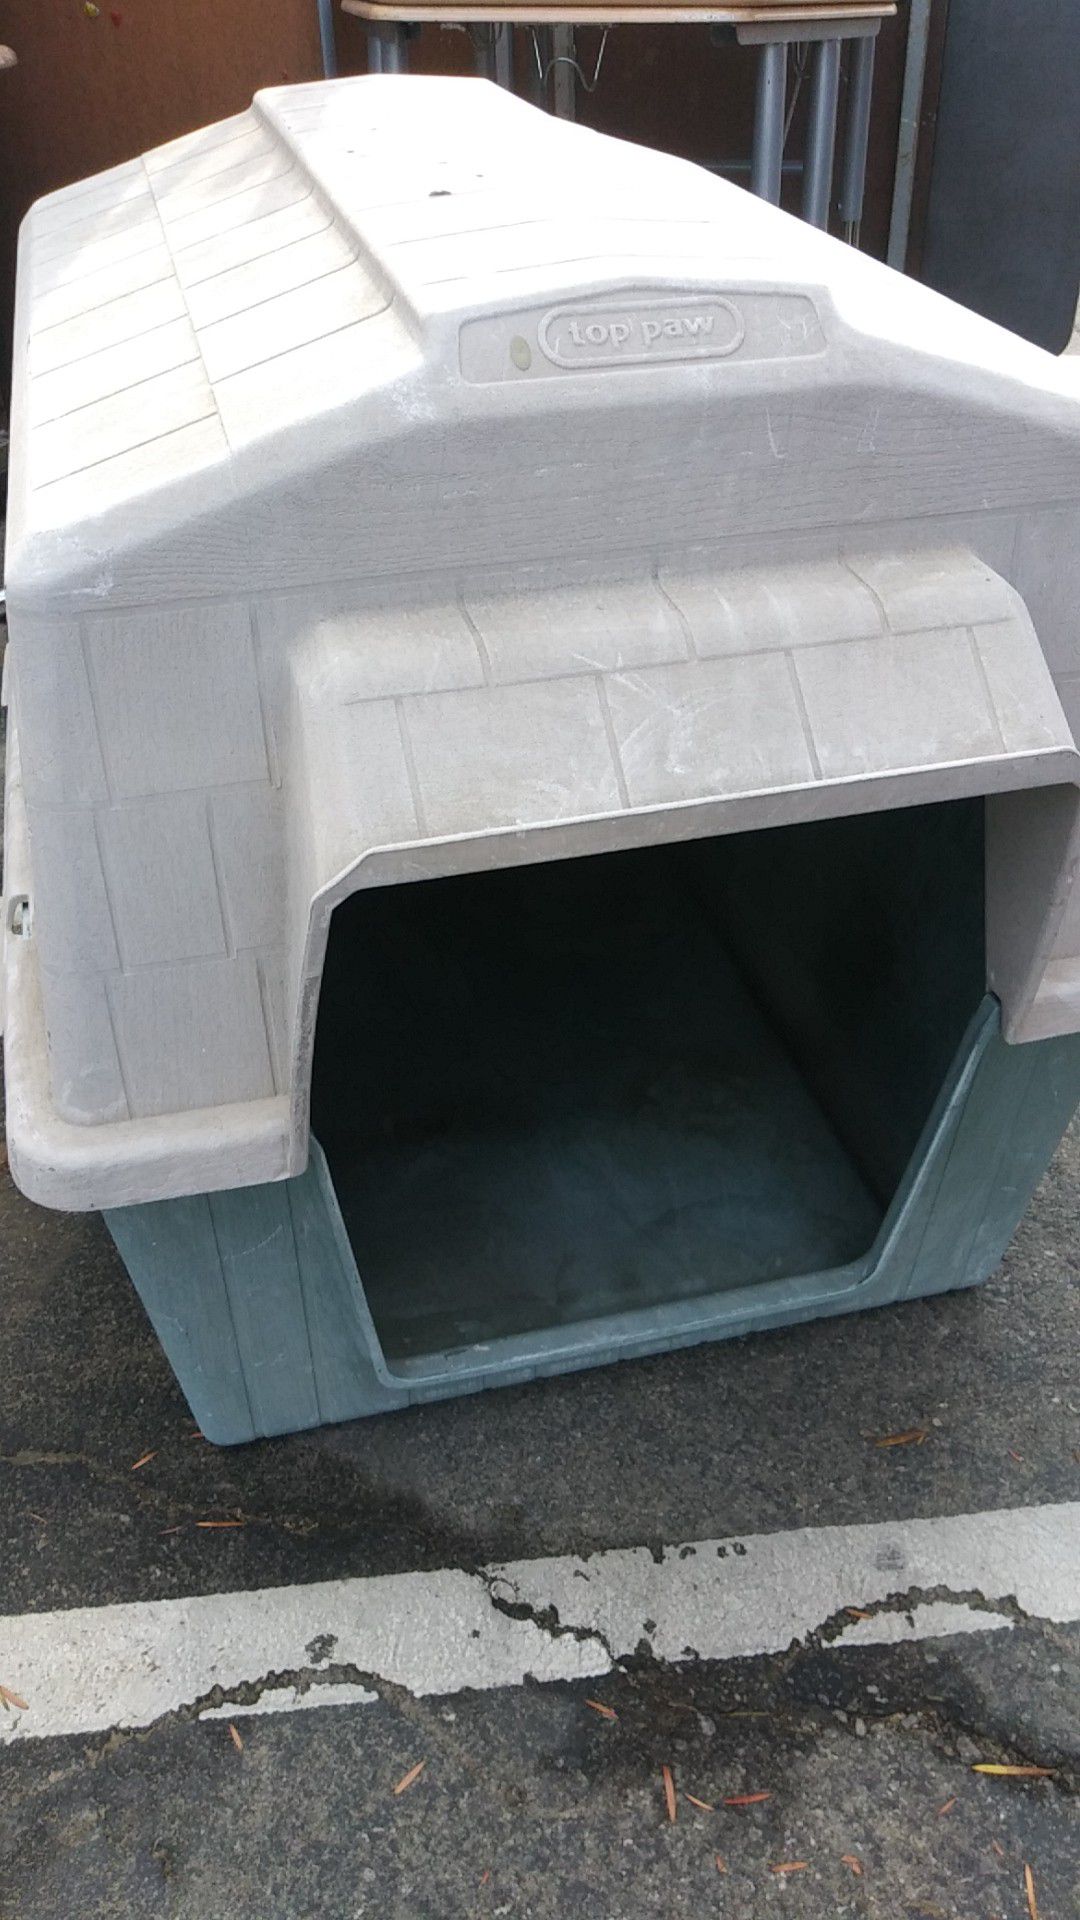 Top Paw large dog house